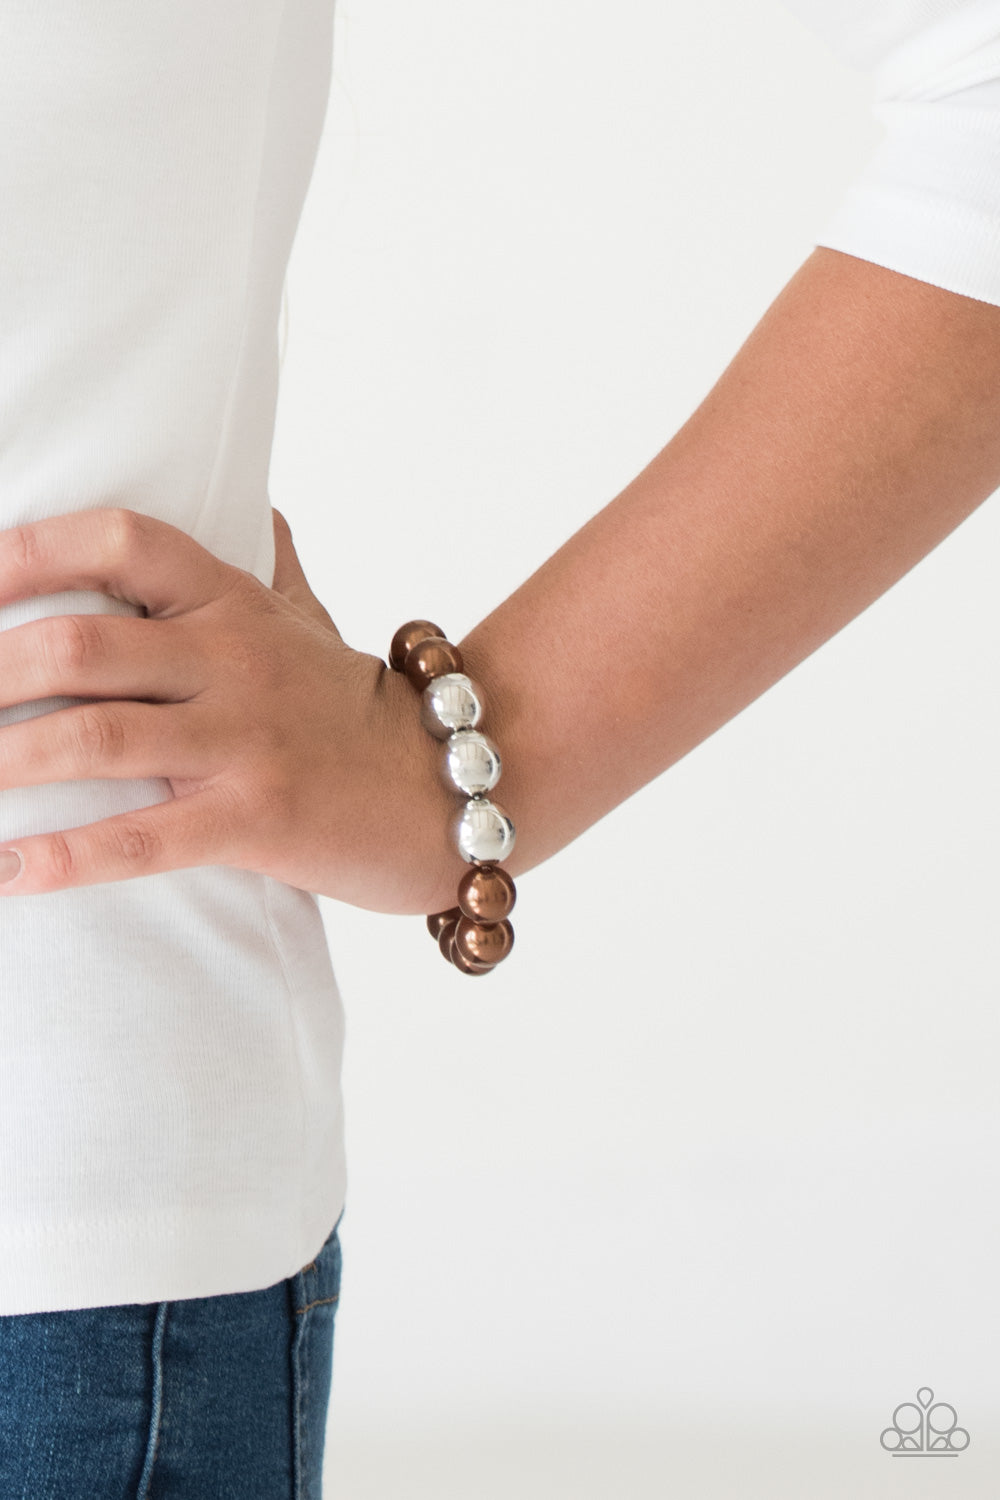 Paparazzi Accessories All Dressed UPTOWN - Brown Bracelets gradually increased in size near the center, oversized pearly brown and shiny silver beads are threaded along a stretchy band around the wrist for a glamorous finish.